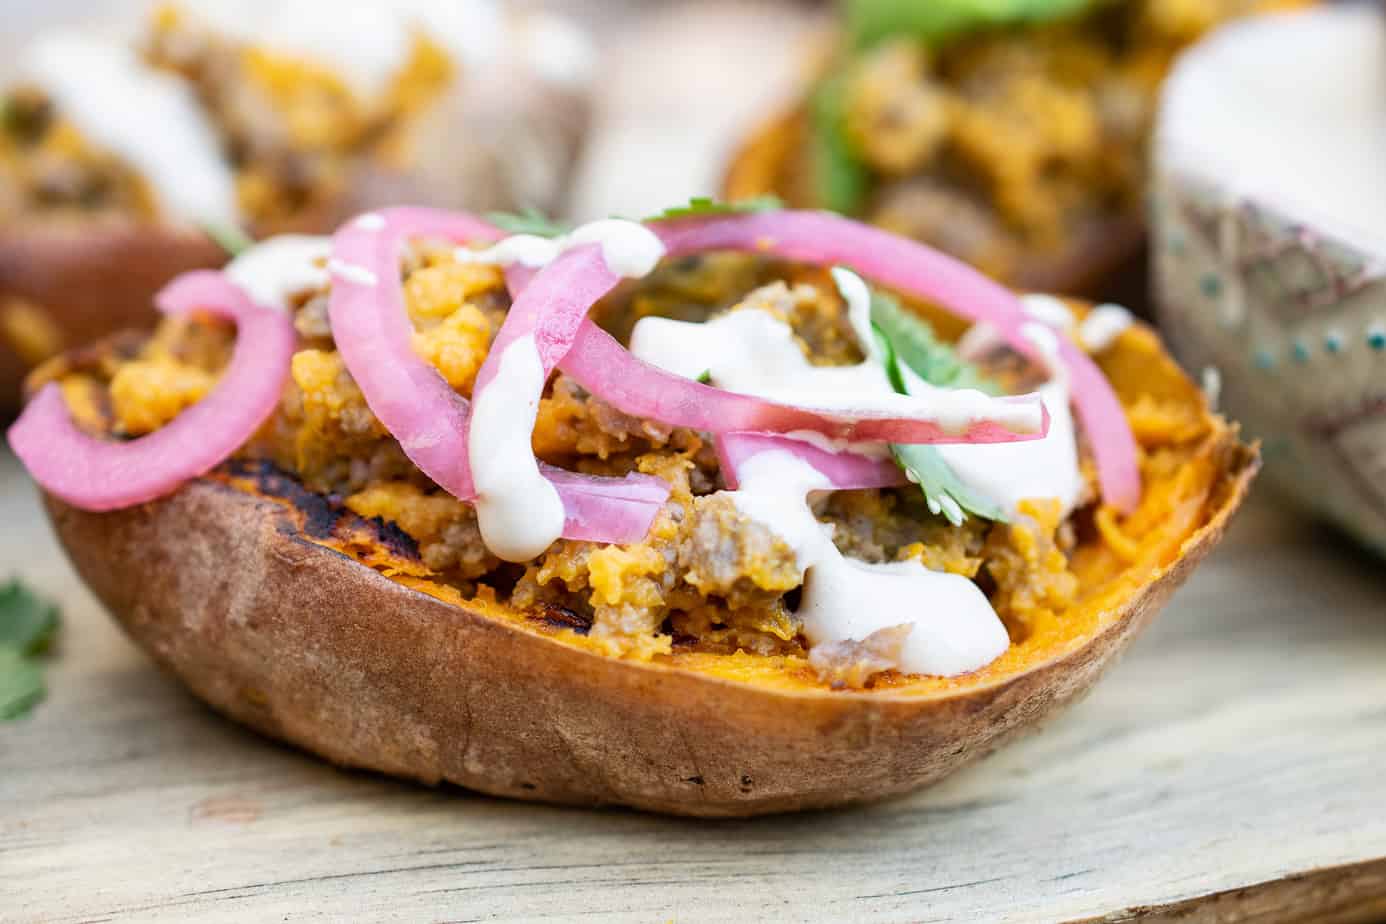 stuffed sweet potato skin- garnished with pickled red onion. drizzed with mayo-mustard sauce 